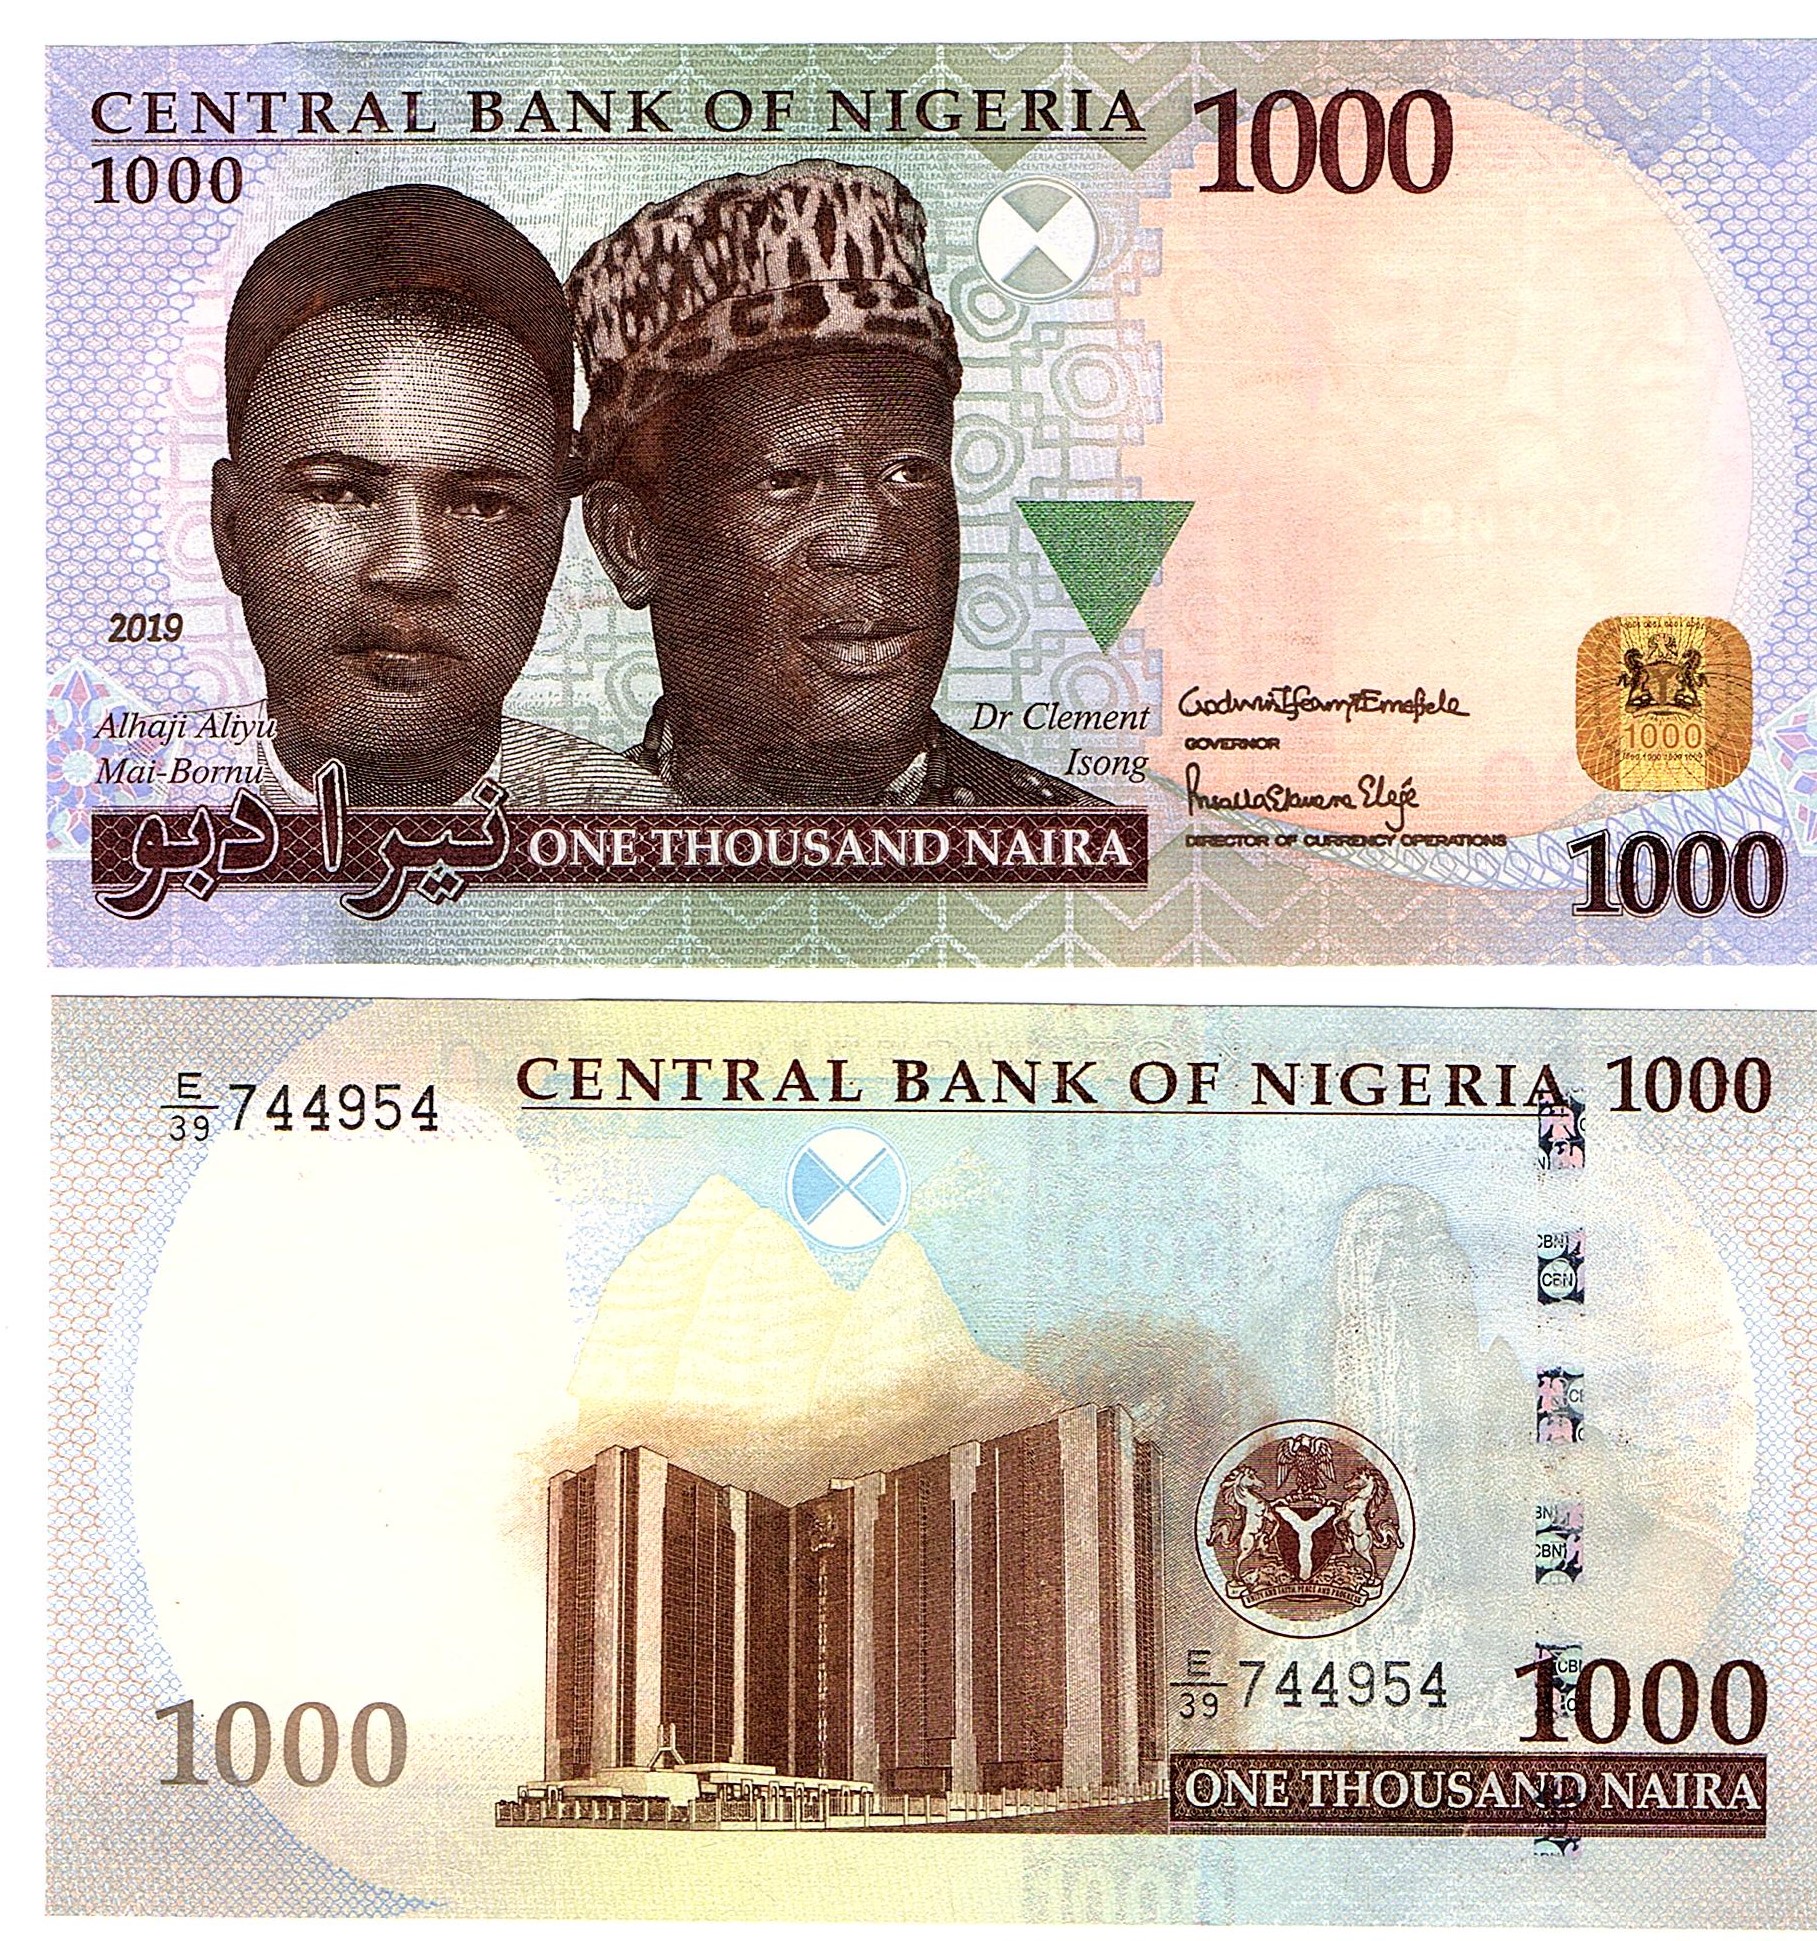 What year was the ₦1000 introduced?